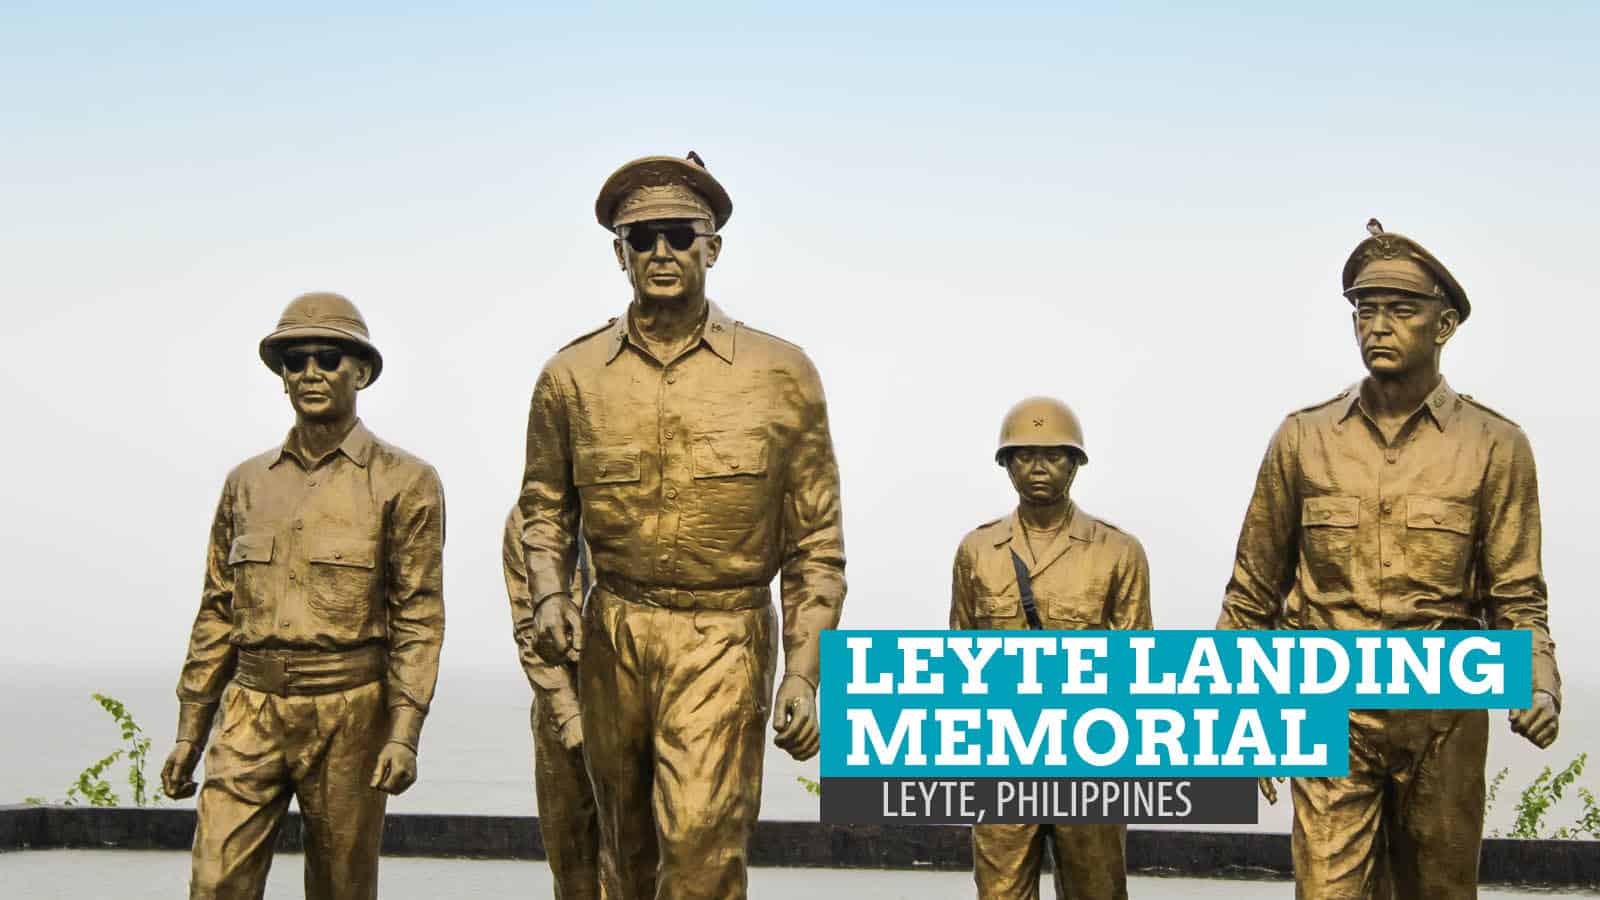 LEYTE LANDING MEMORIAL: MacArthur Park in Palo, Leyte, Philippines